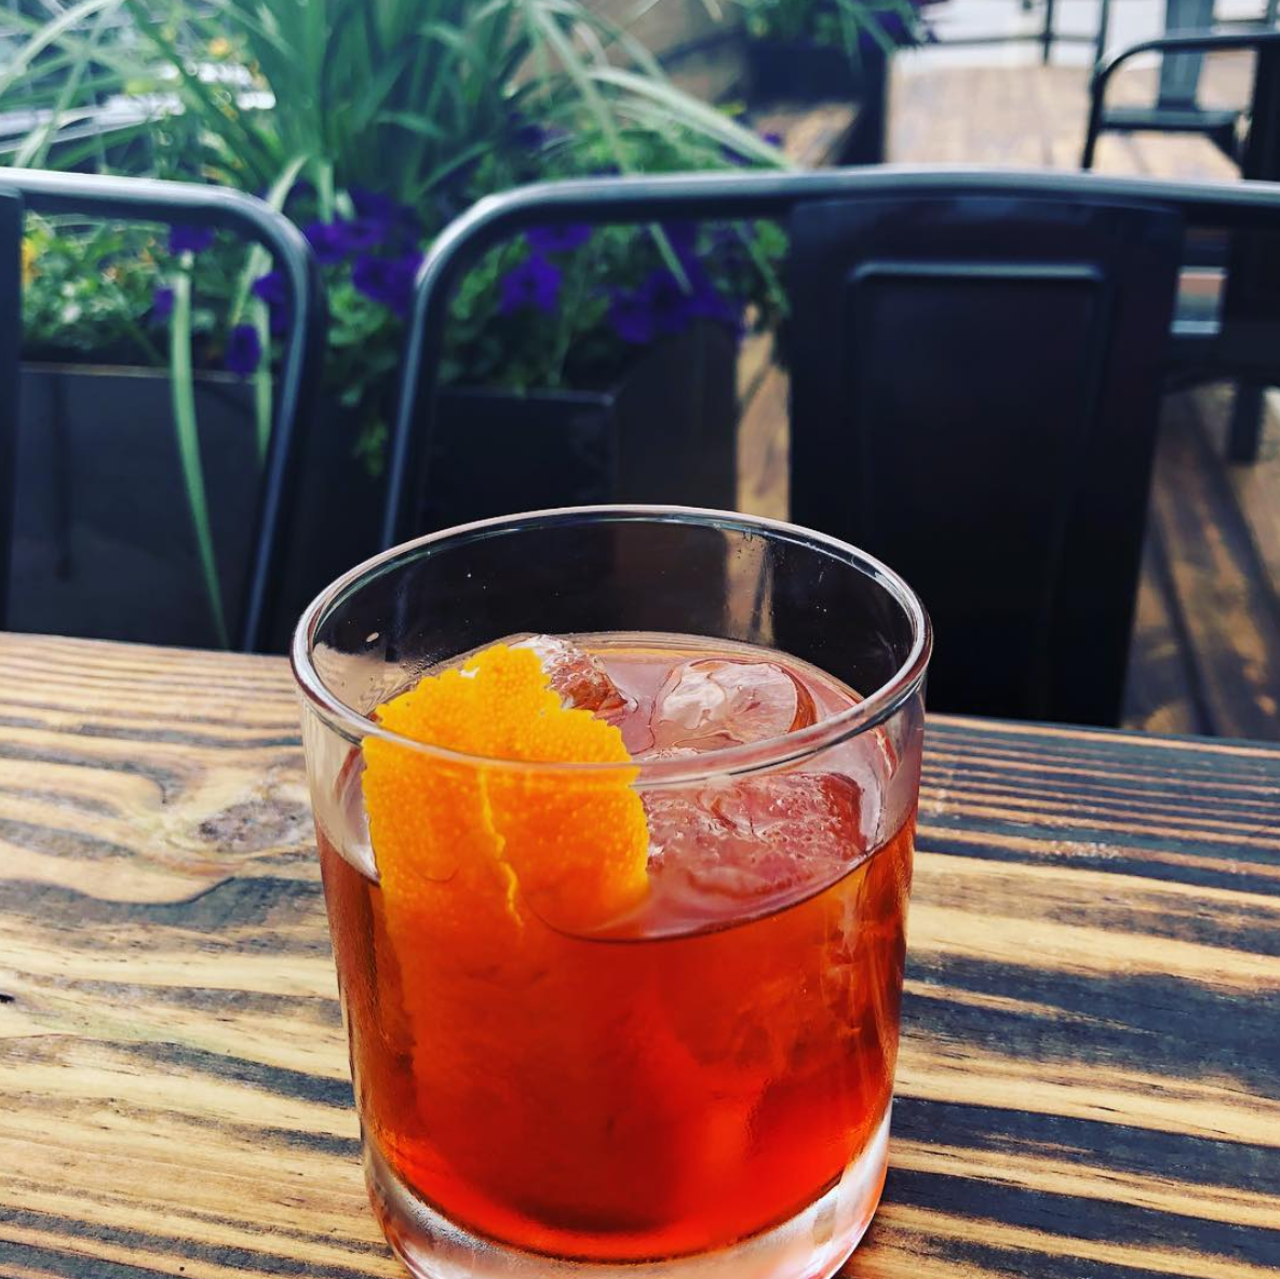 Still Golden Social House
1900 Broadway, facebook.com/StillGoldenSH
The original Stay Golden may have been bulldozed this past summer, but no worries: The Boulevardier Group is reopened their patio concept with added sport bar vibes.
Photo via Instagram / mhairgoddess